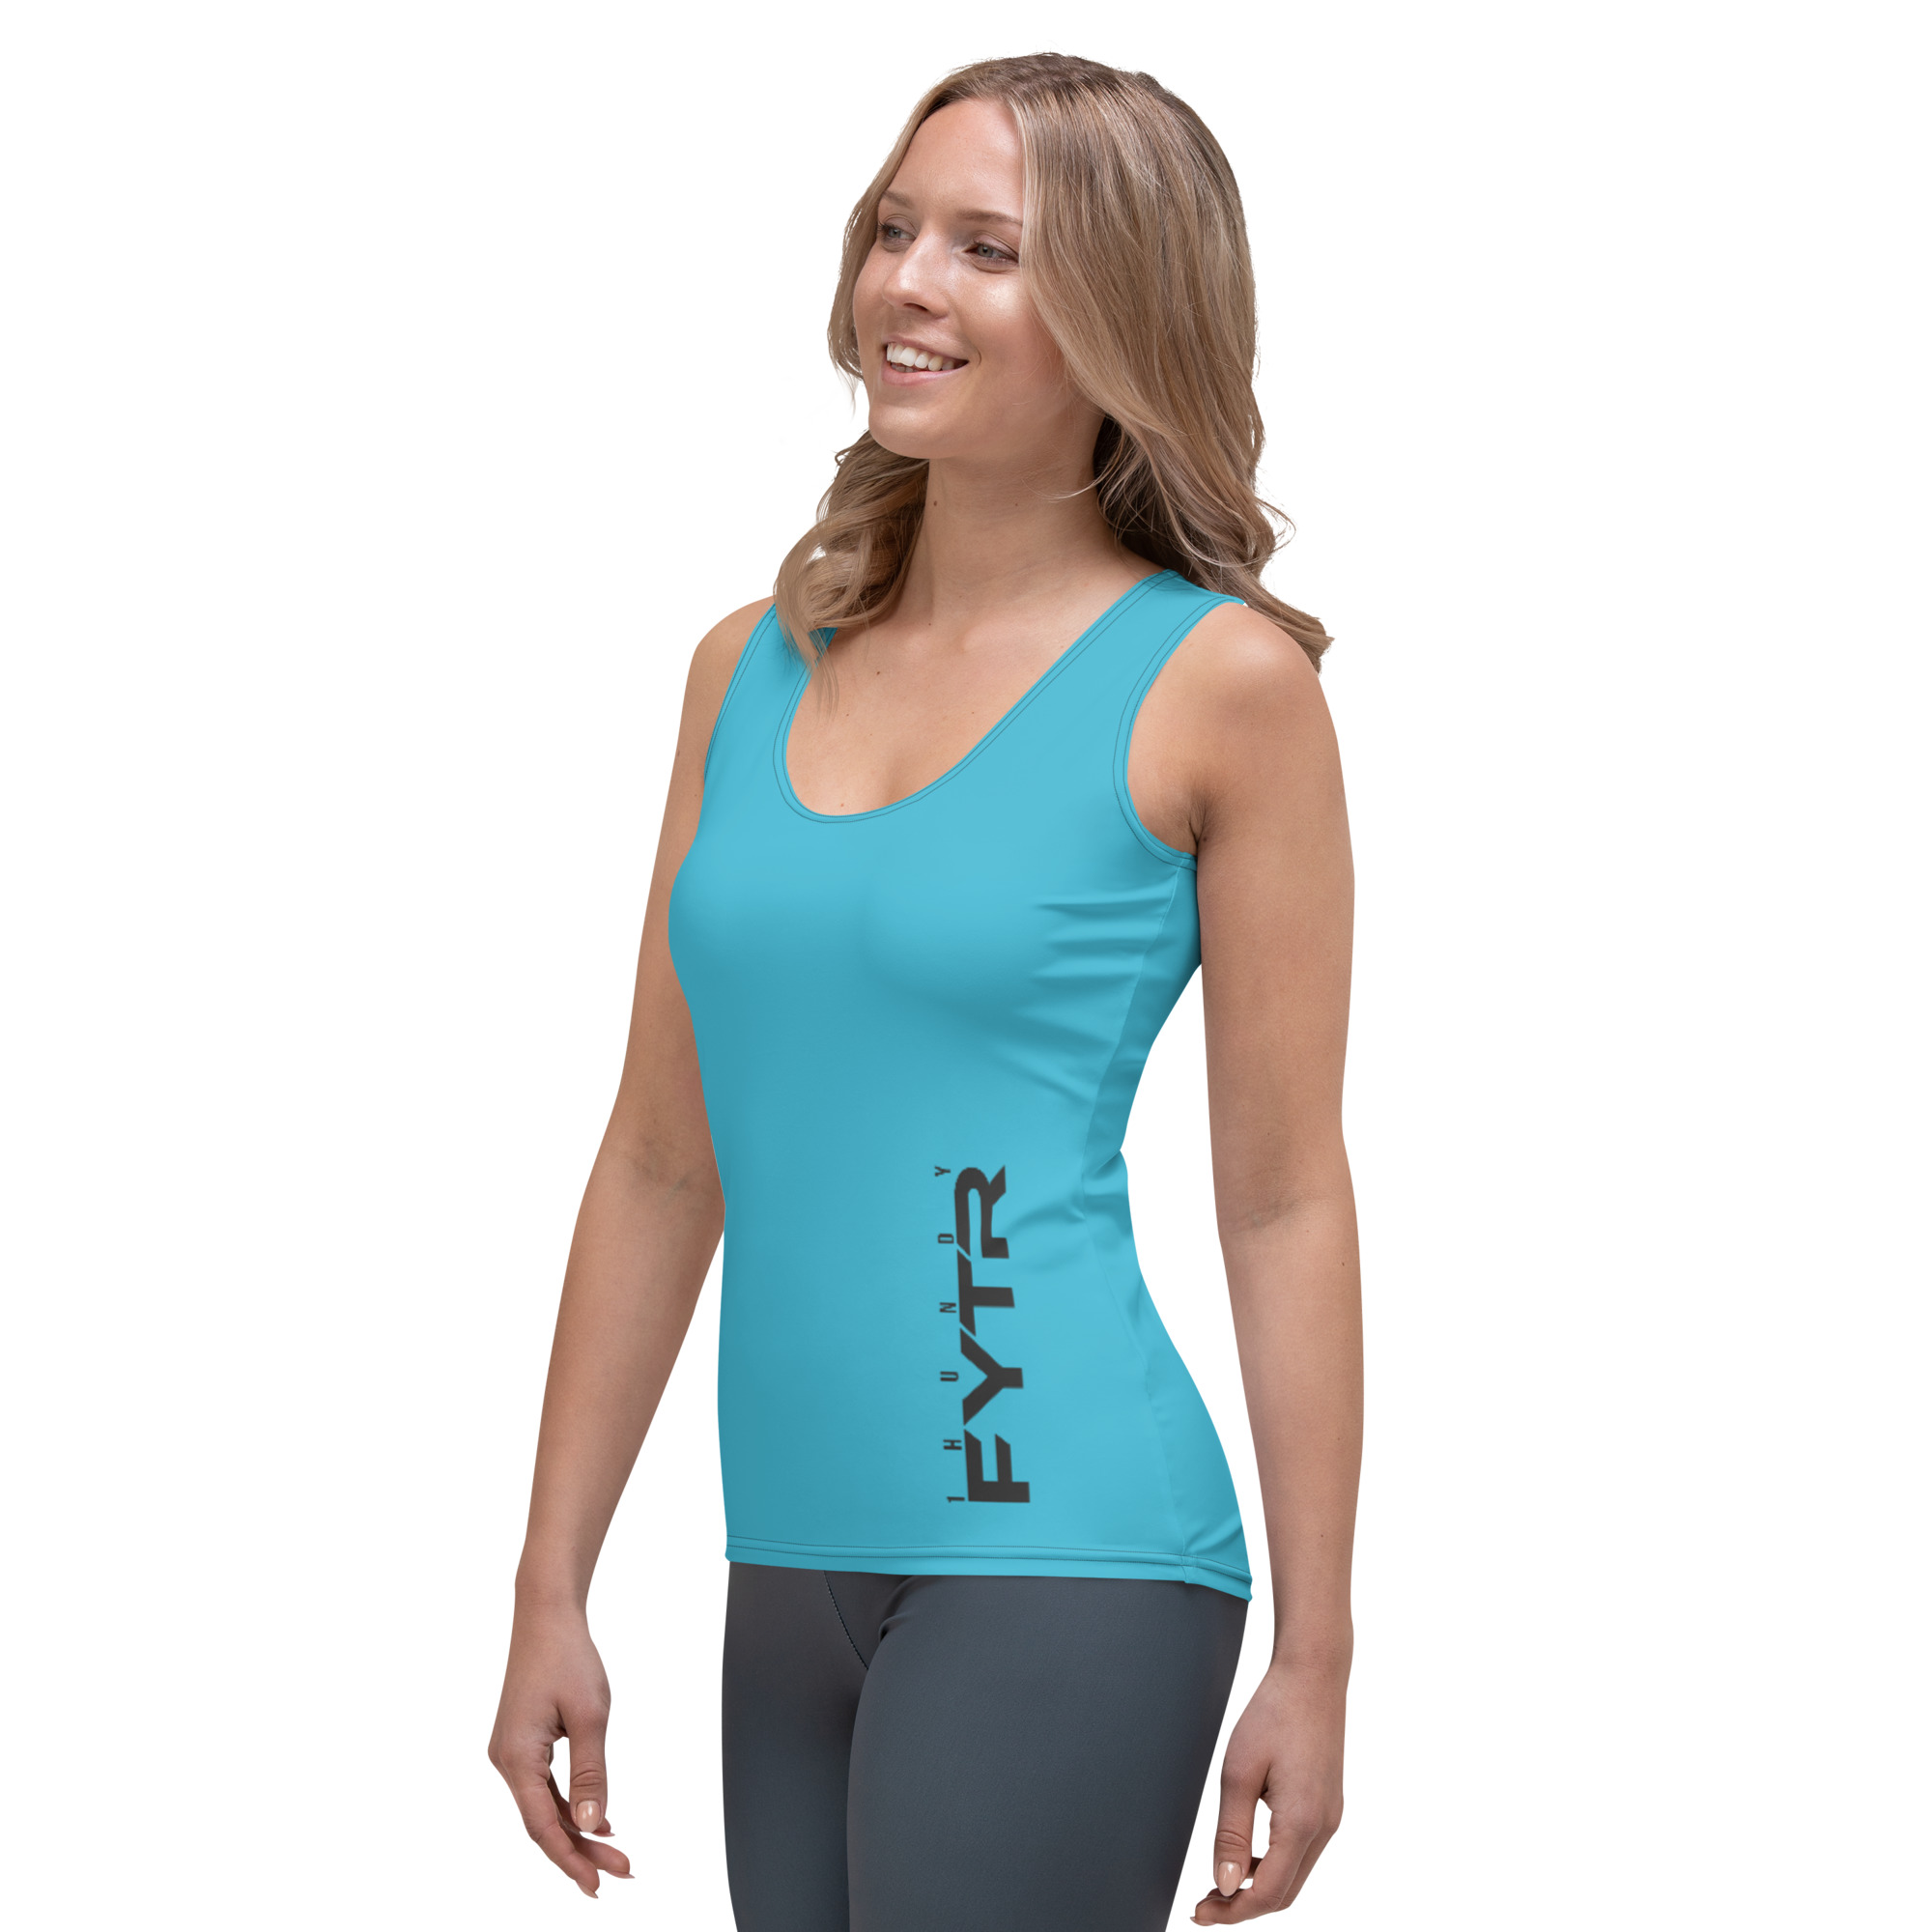 Women's FYTR Collection Cyan Tank Top - 1HUNDY Official Store